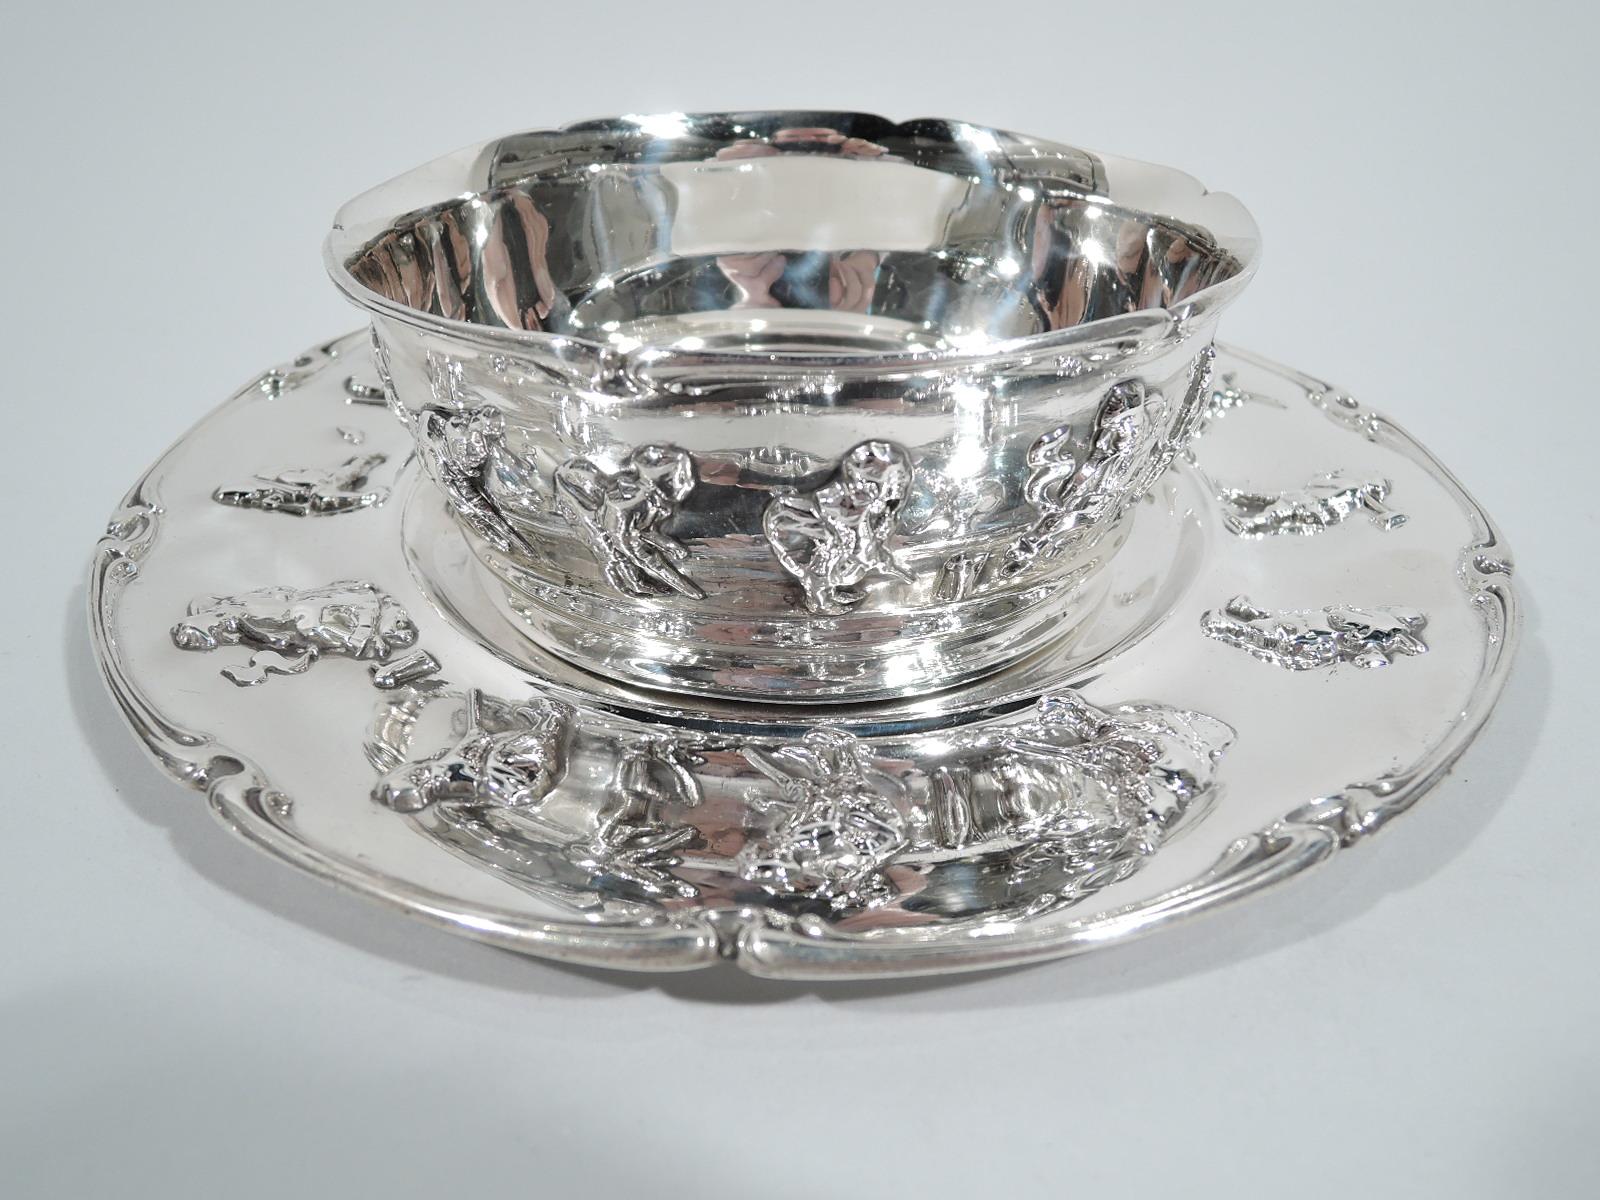 Edwardian sterling silver baby bowl on plate. Made by Gorham in Providence in 1911. Bowl has curved and tapering sides. Plate has well and wide shoulder. Both have whiplash-scrolled rim and applied figures—an eclectic frieze that includes